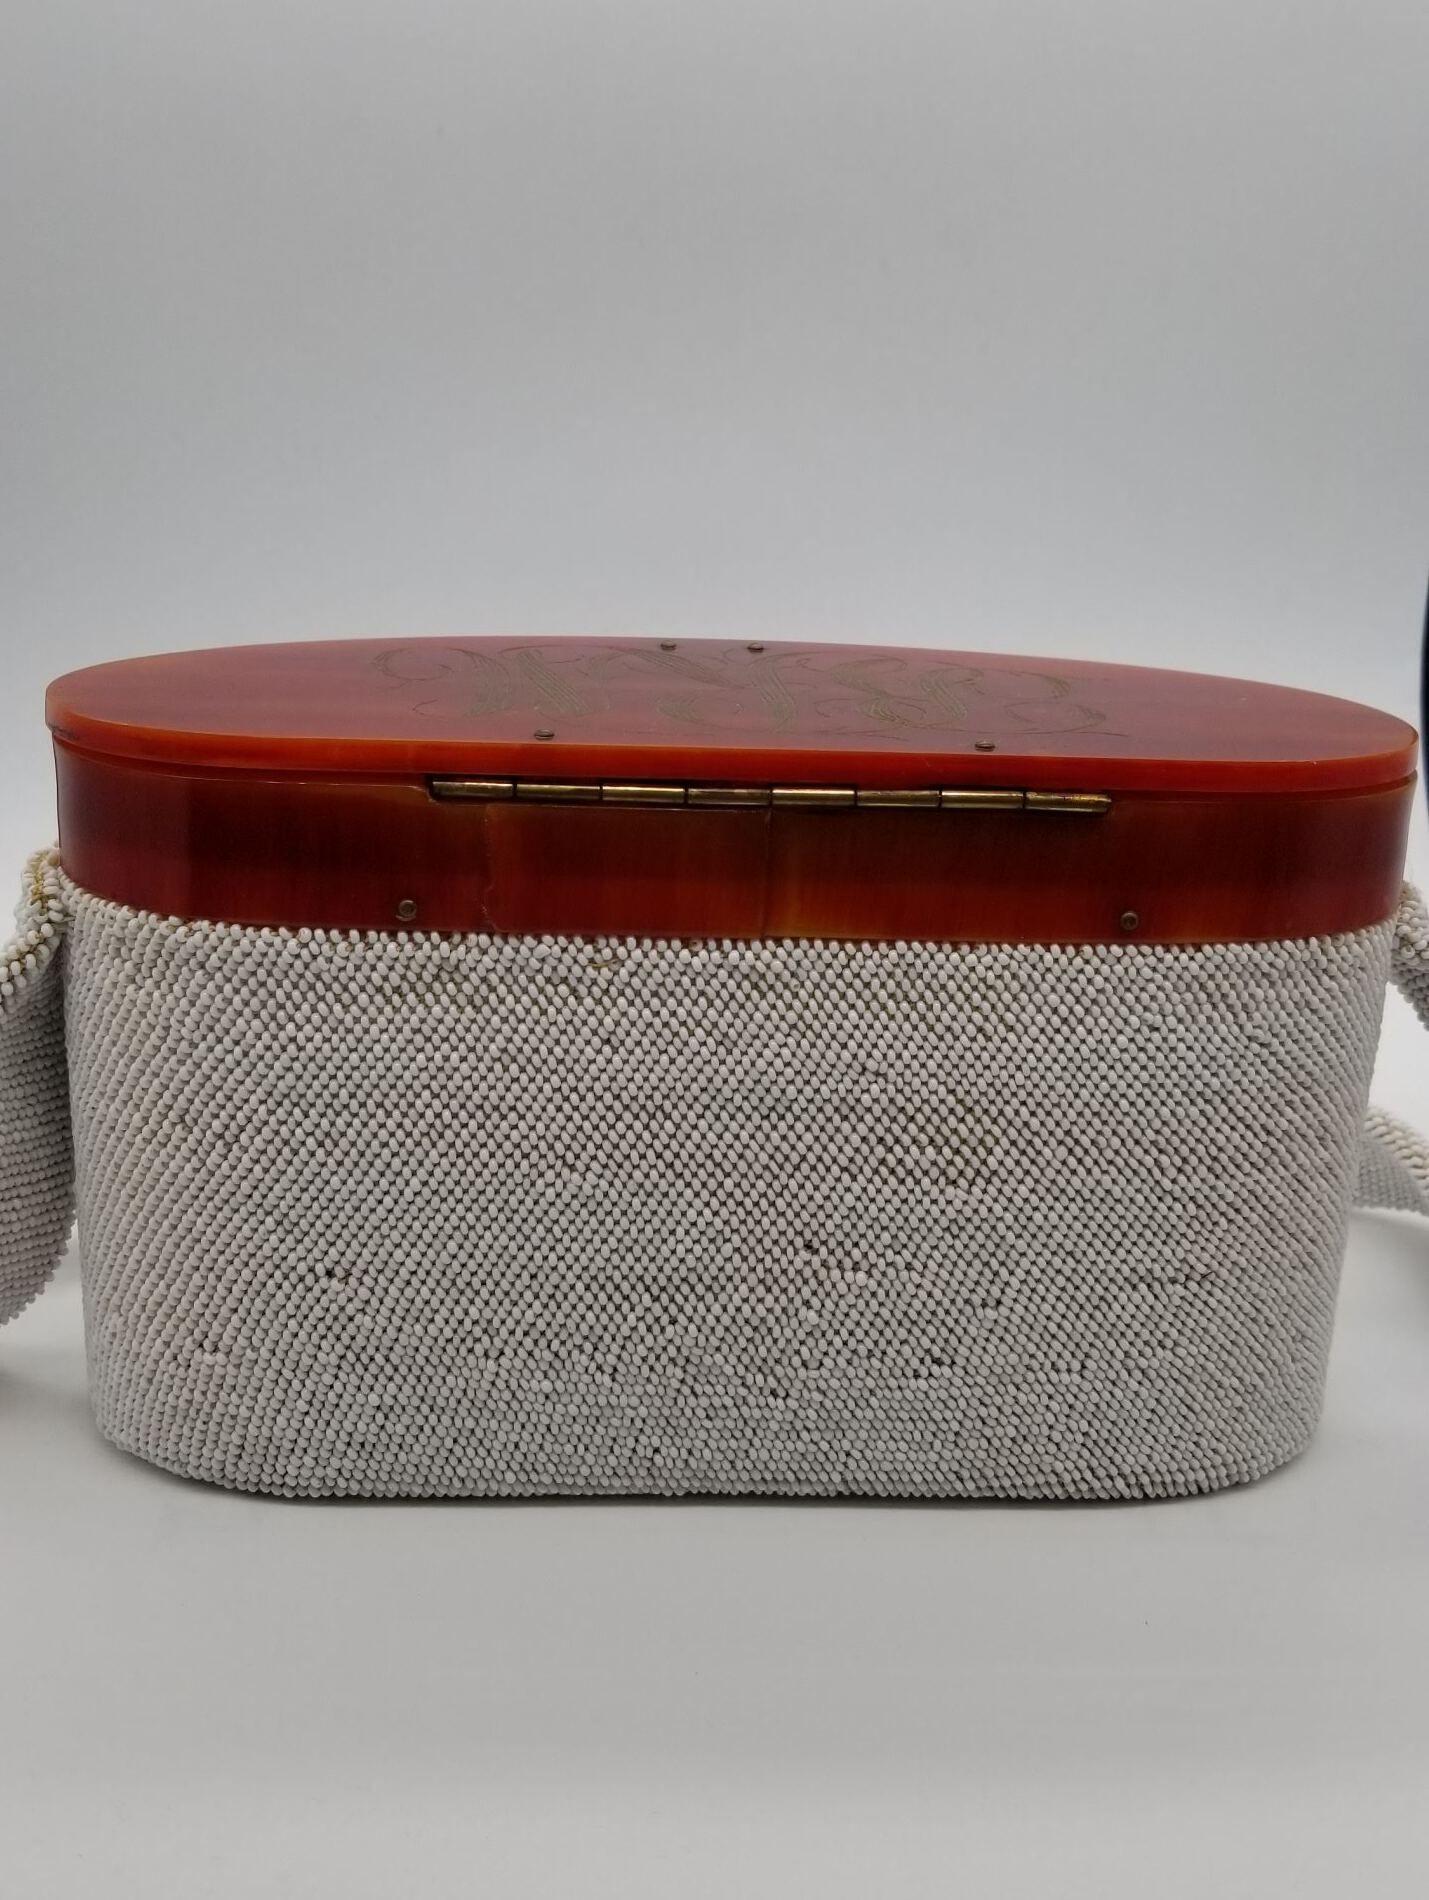 20th Century White Caviar Bead Box Purse w Tortoiseshell Celluloid Lid and Long Strap, 1950s For Sale